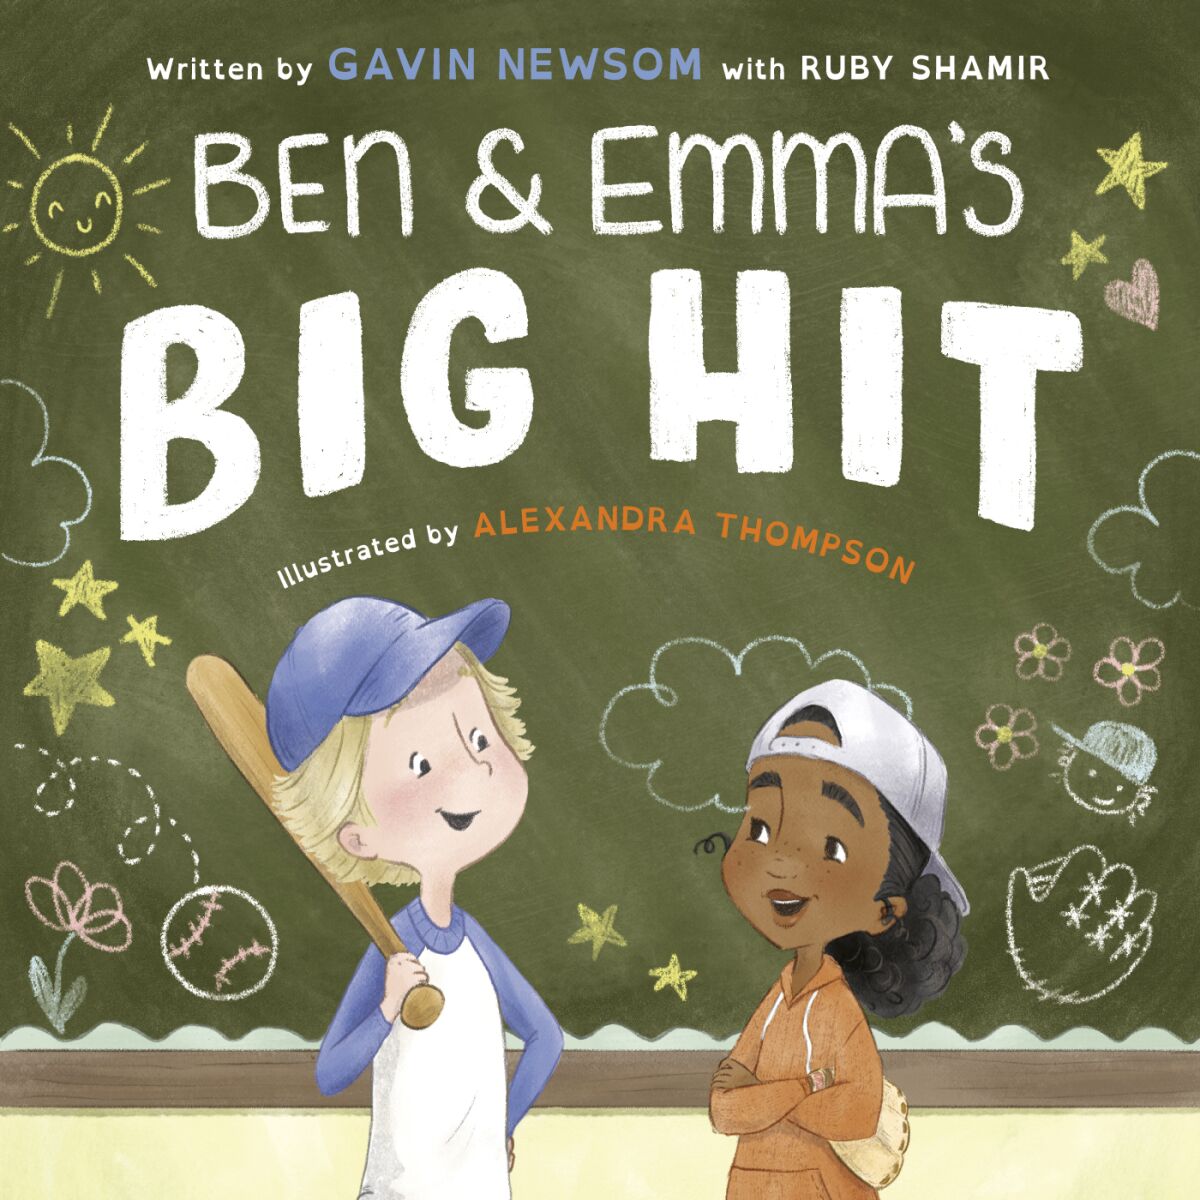 Cover image of the book "Ben and Emma's Big Hit"